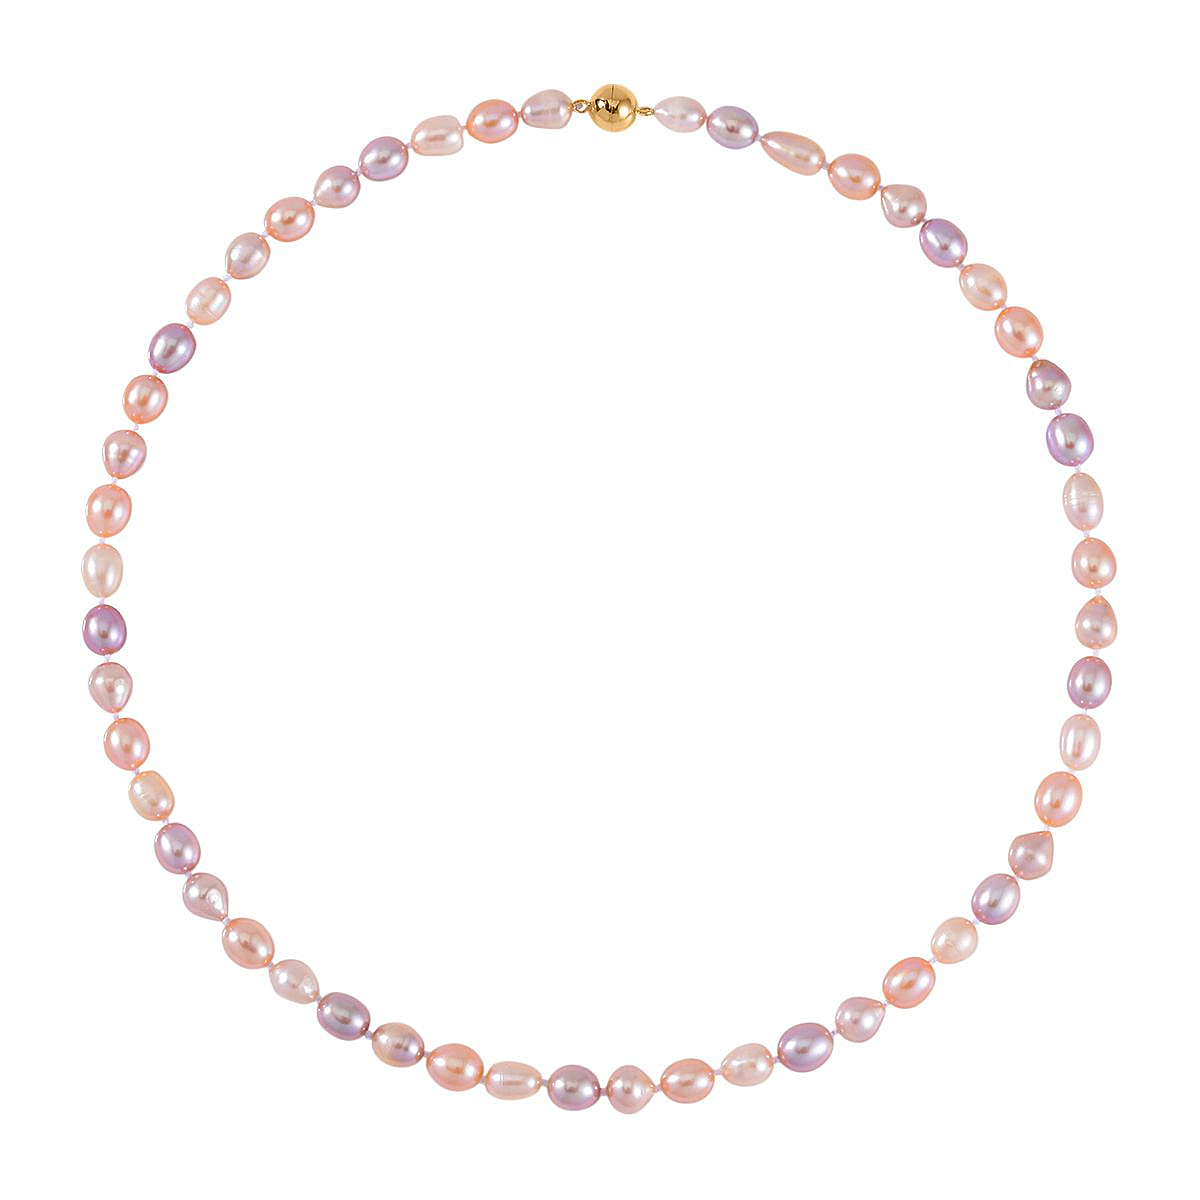 Multi Colour Fresh Water Pearl Necklace (Size - 20) in Yellow Gold Overlay Sterling Silver with Magnetic Lock